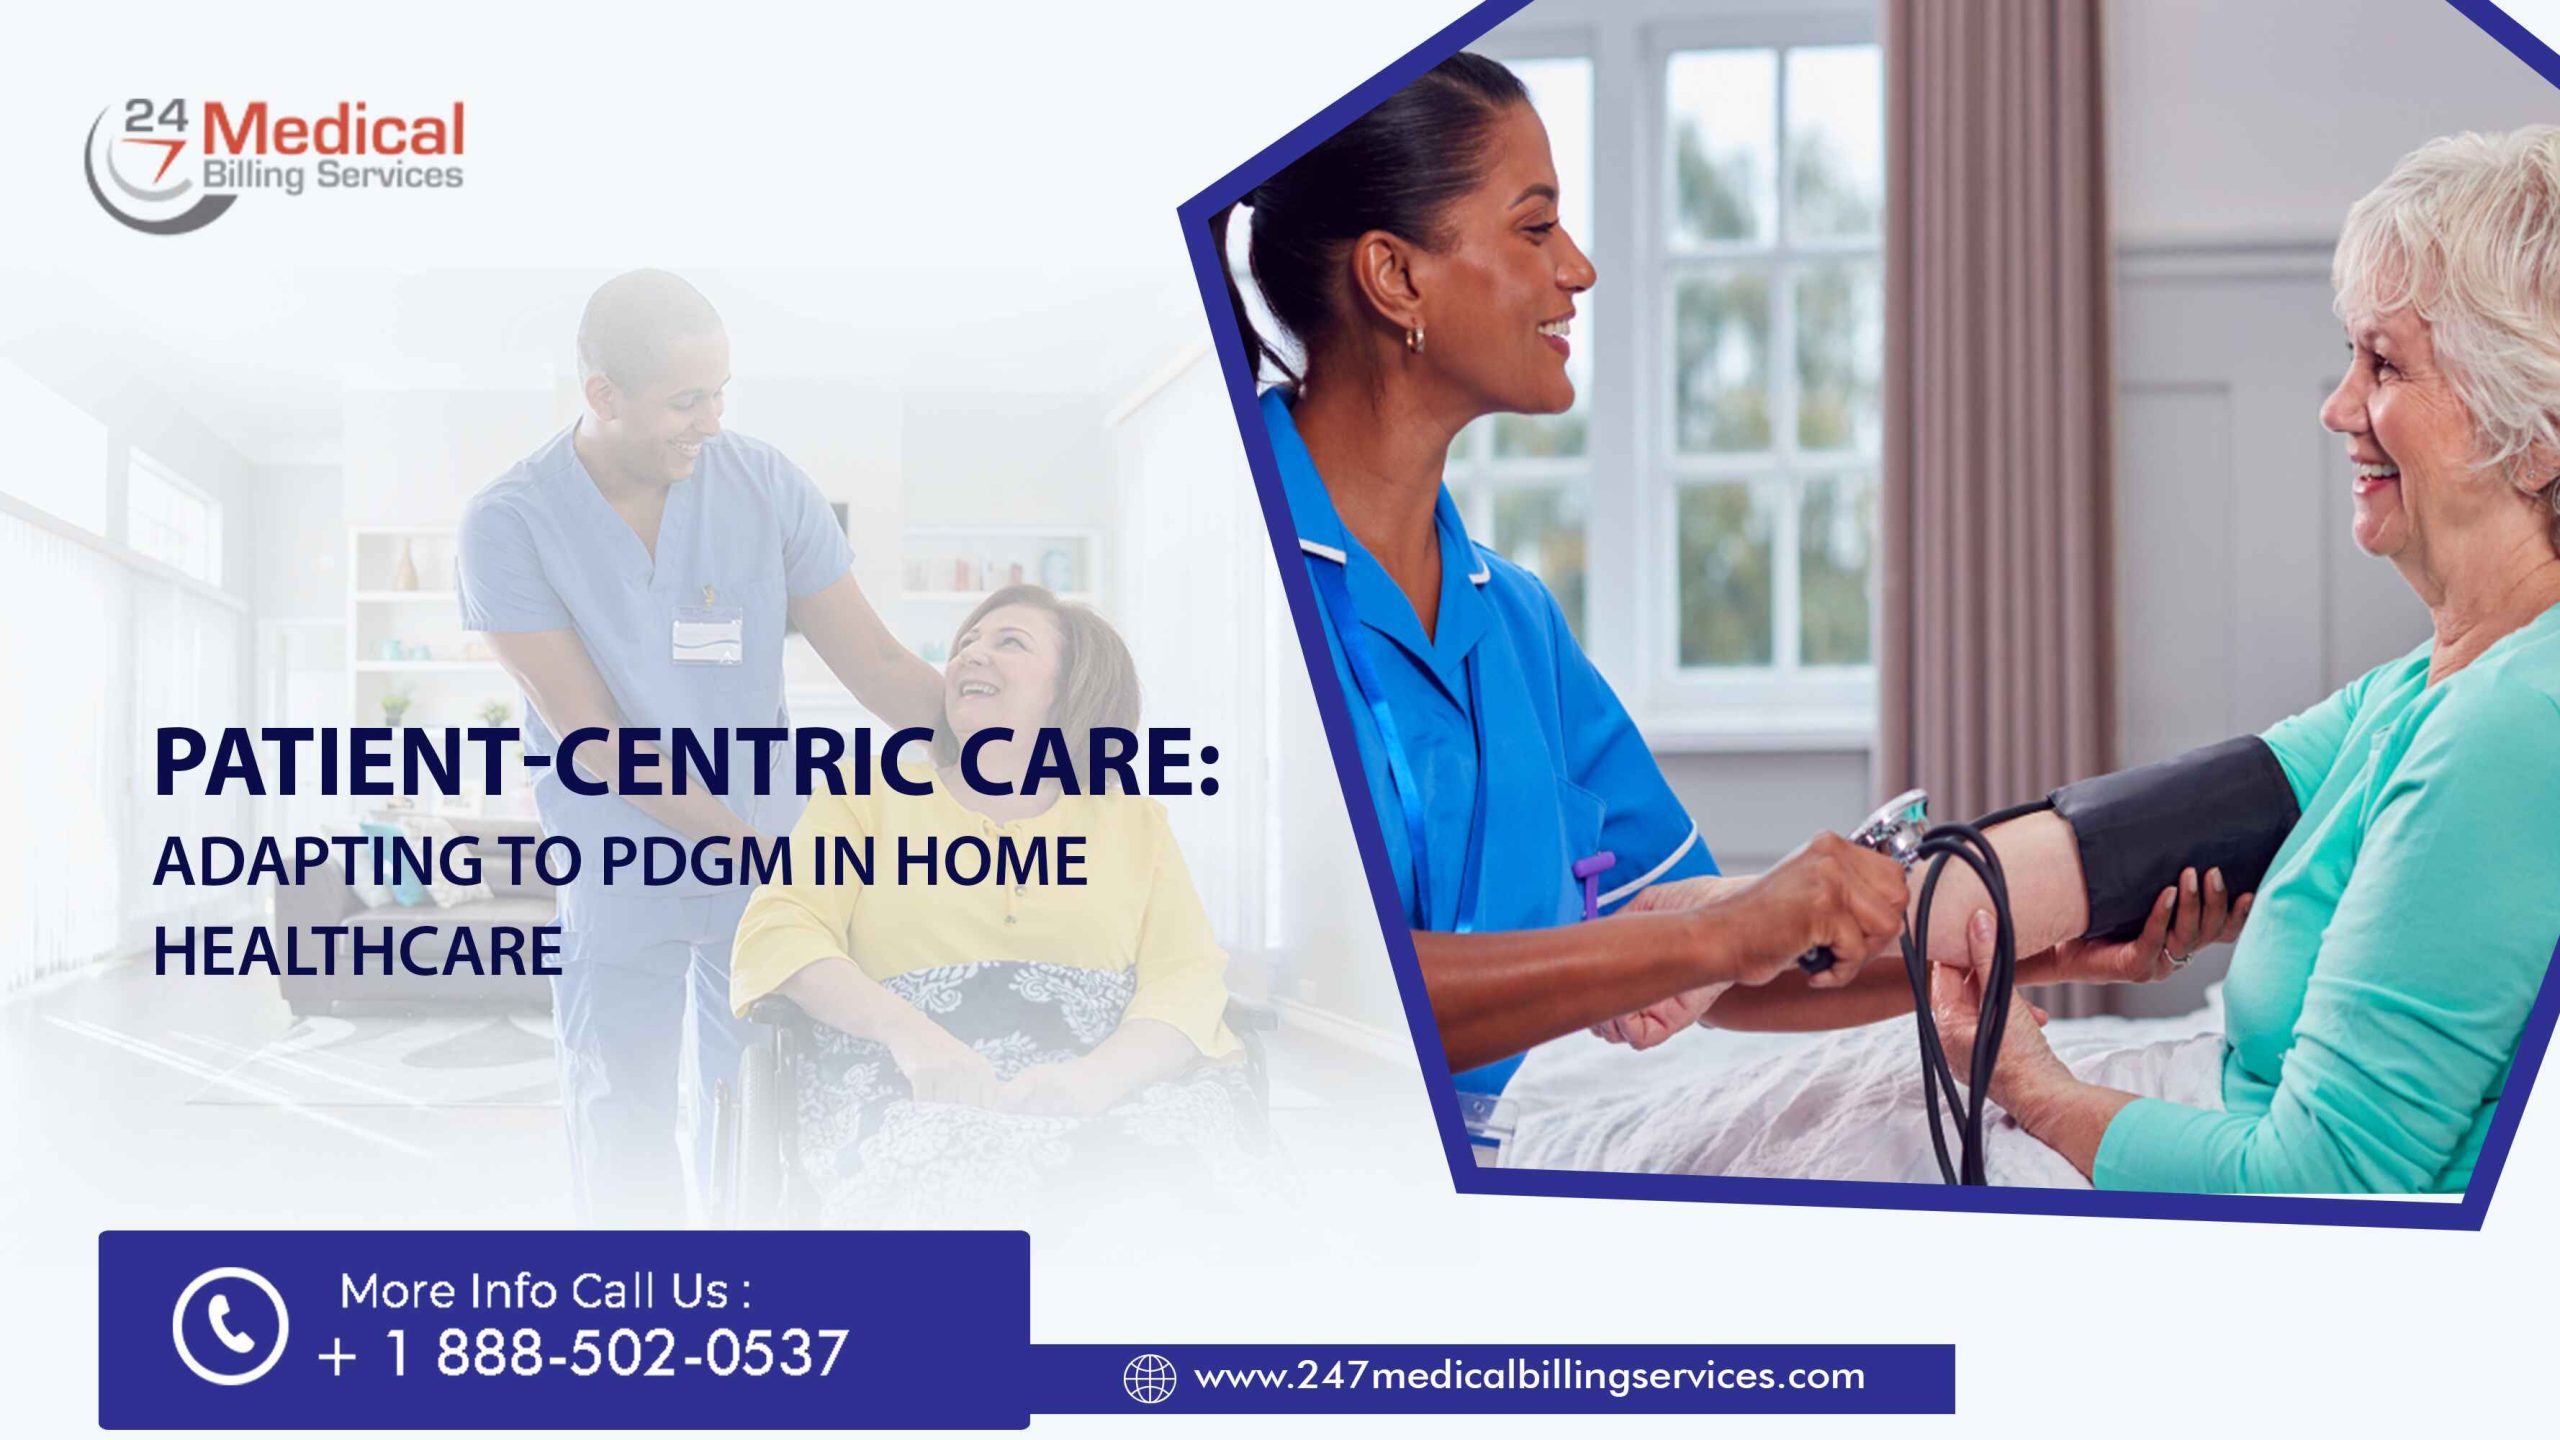  Patient-Centric Care: Adapting to PDGM in Home Healthcare